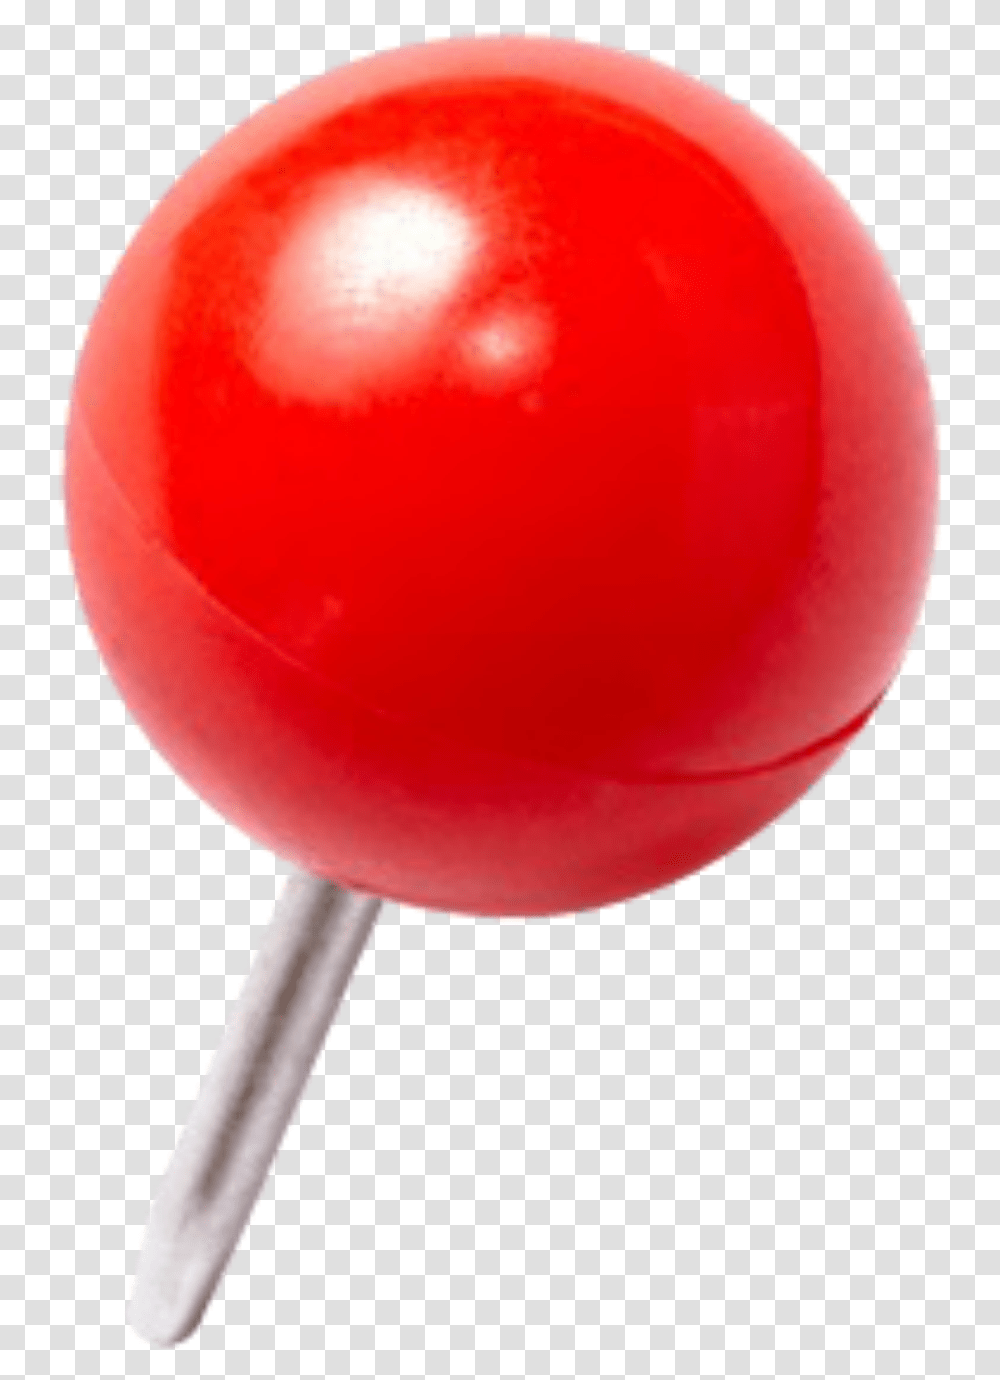 A South African Travel Blog Sphere, Balloon, Food, Candy, Lollipop Transparent Png